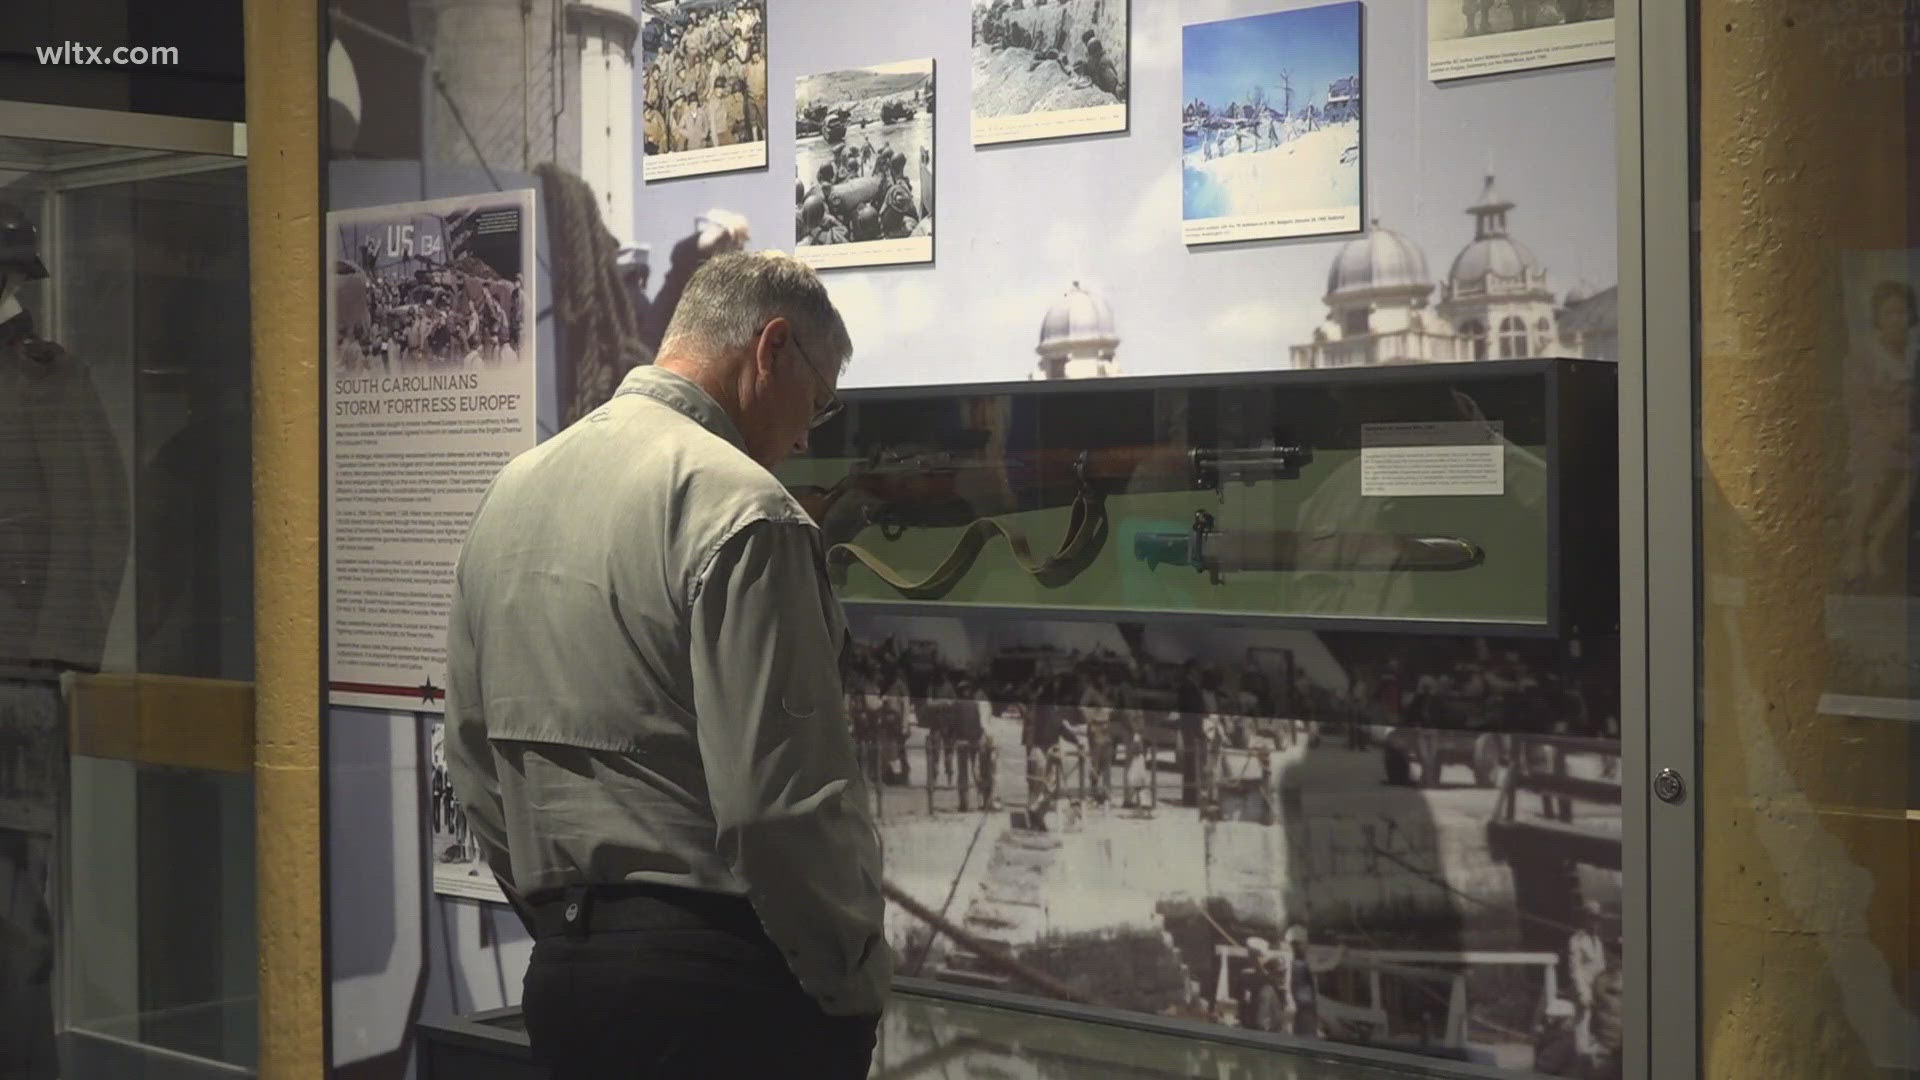 As part of the 80th D-Day commemoration, the museum opened an exhibition that shares the stories of South Carolina men and women who contributed to the war effort.